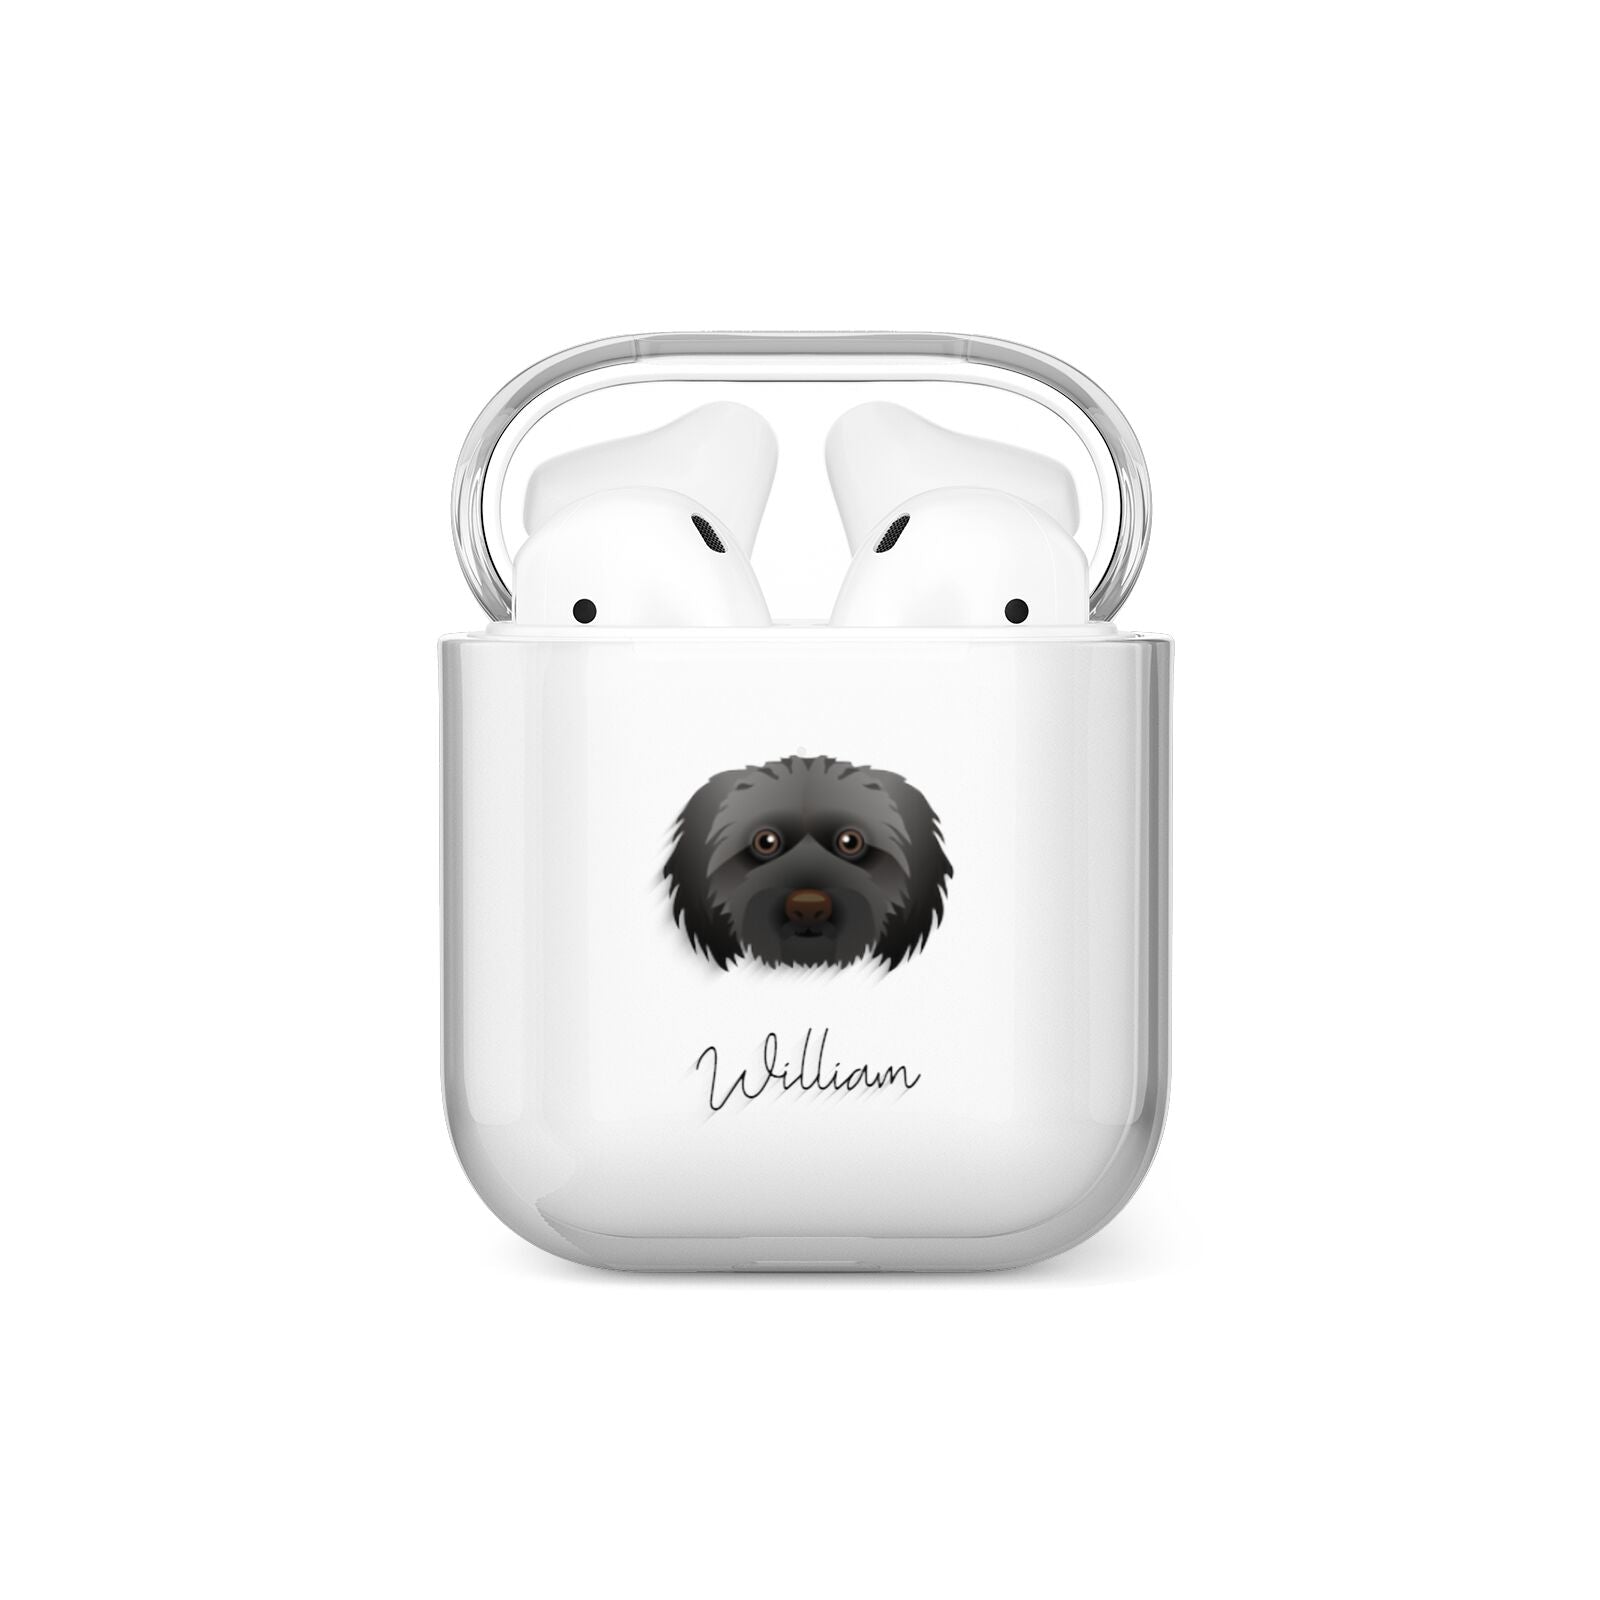 Doxiepoo Personalised AirPods Case